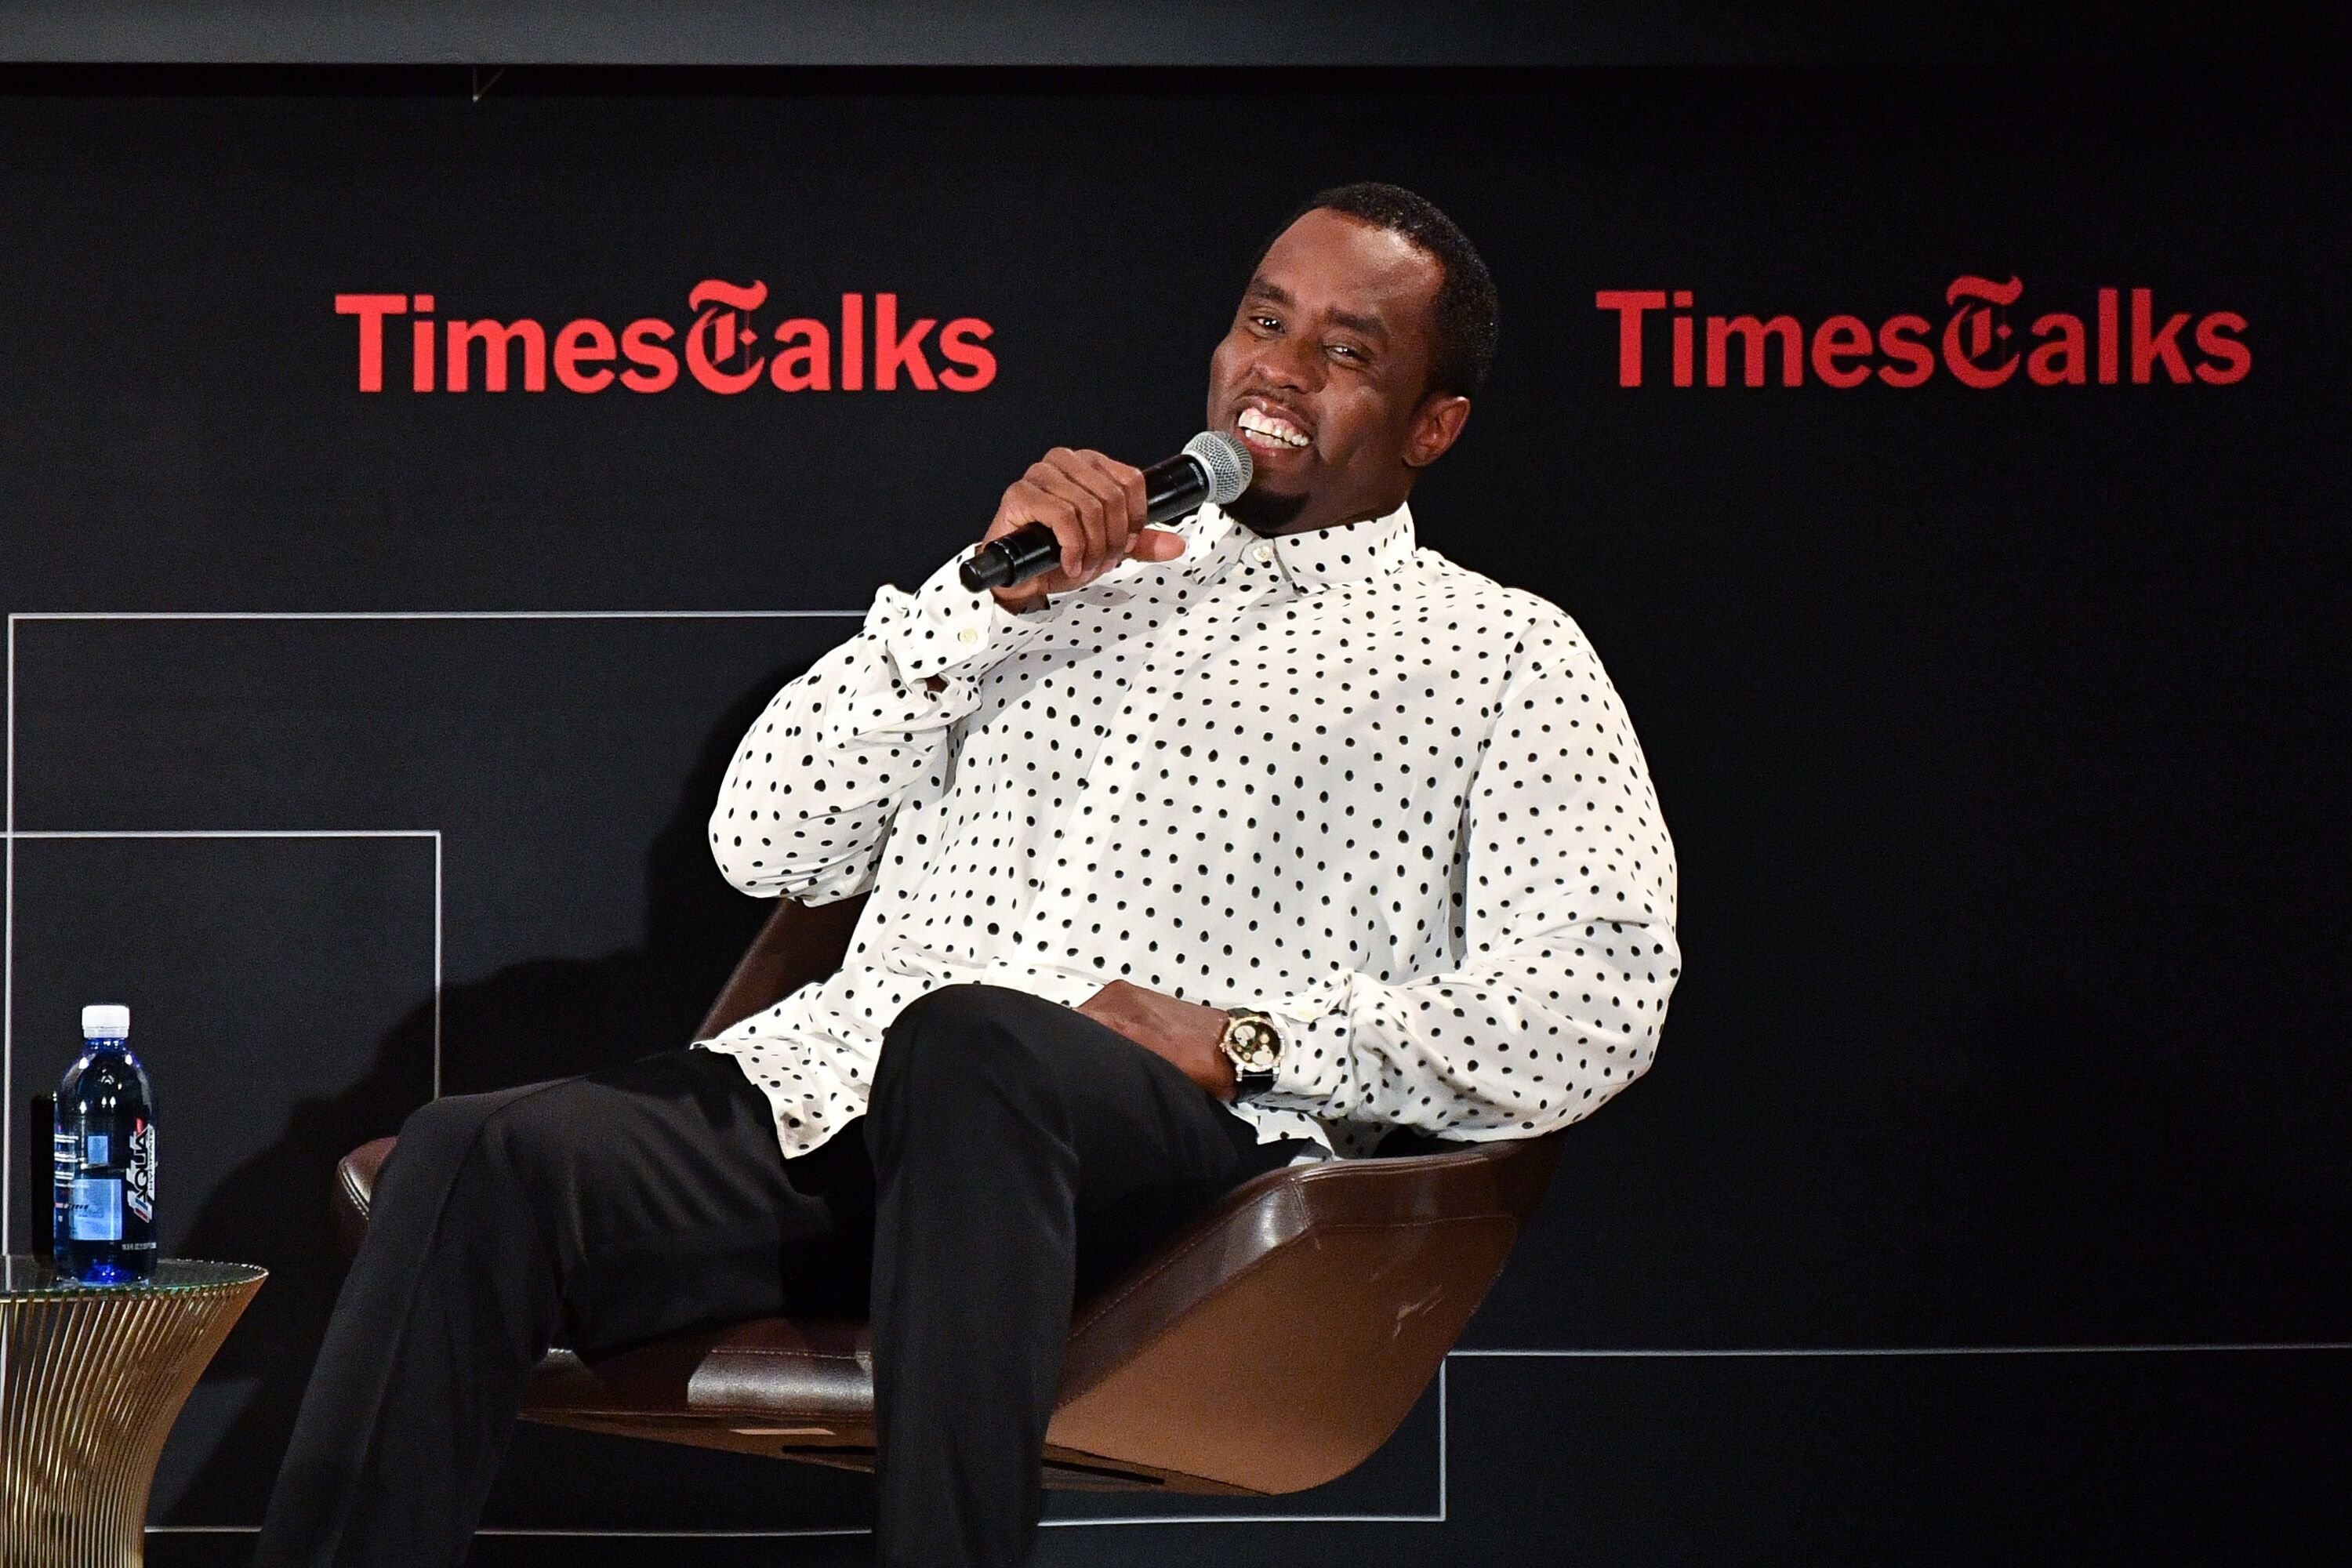 Diddy onstage the Times Talks event | Source: Getty Images/GlobalImagesUkraine